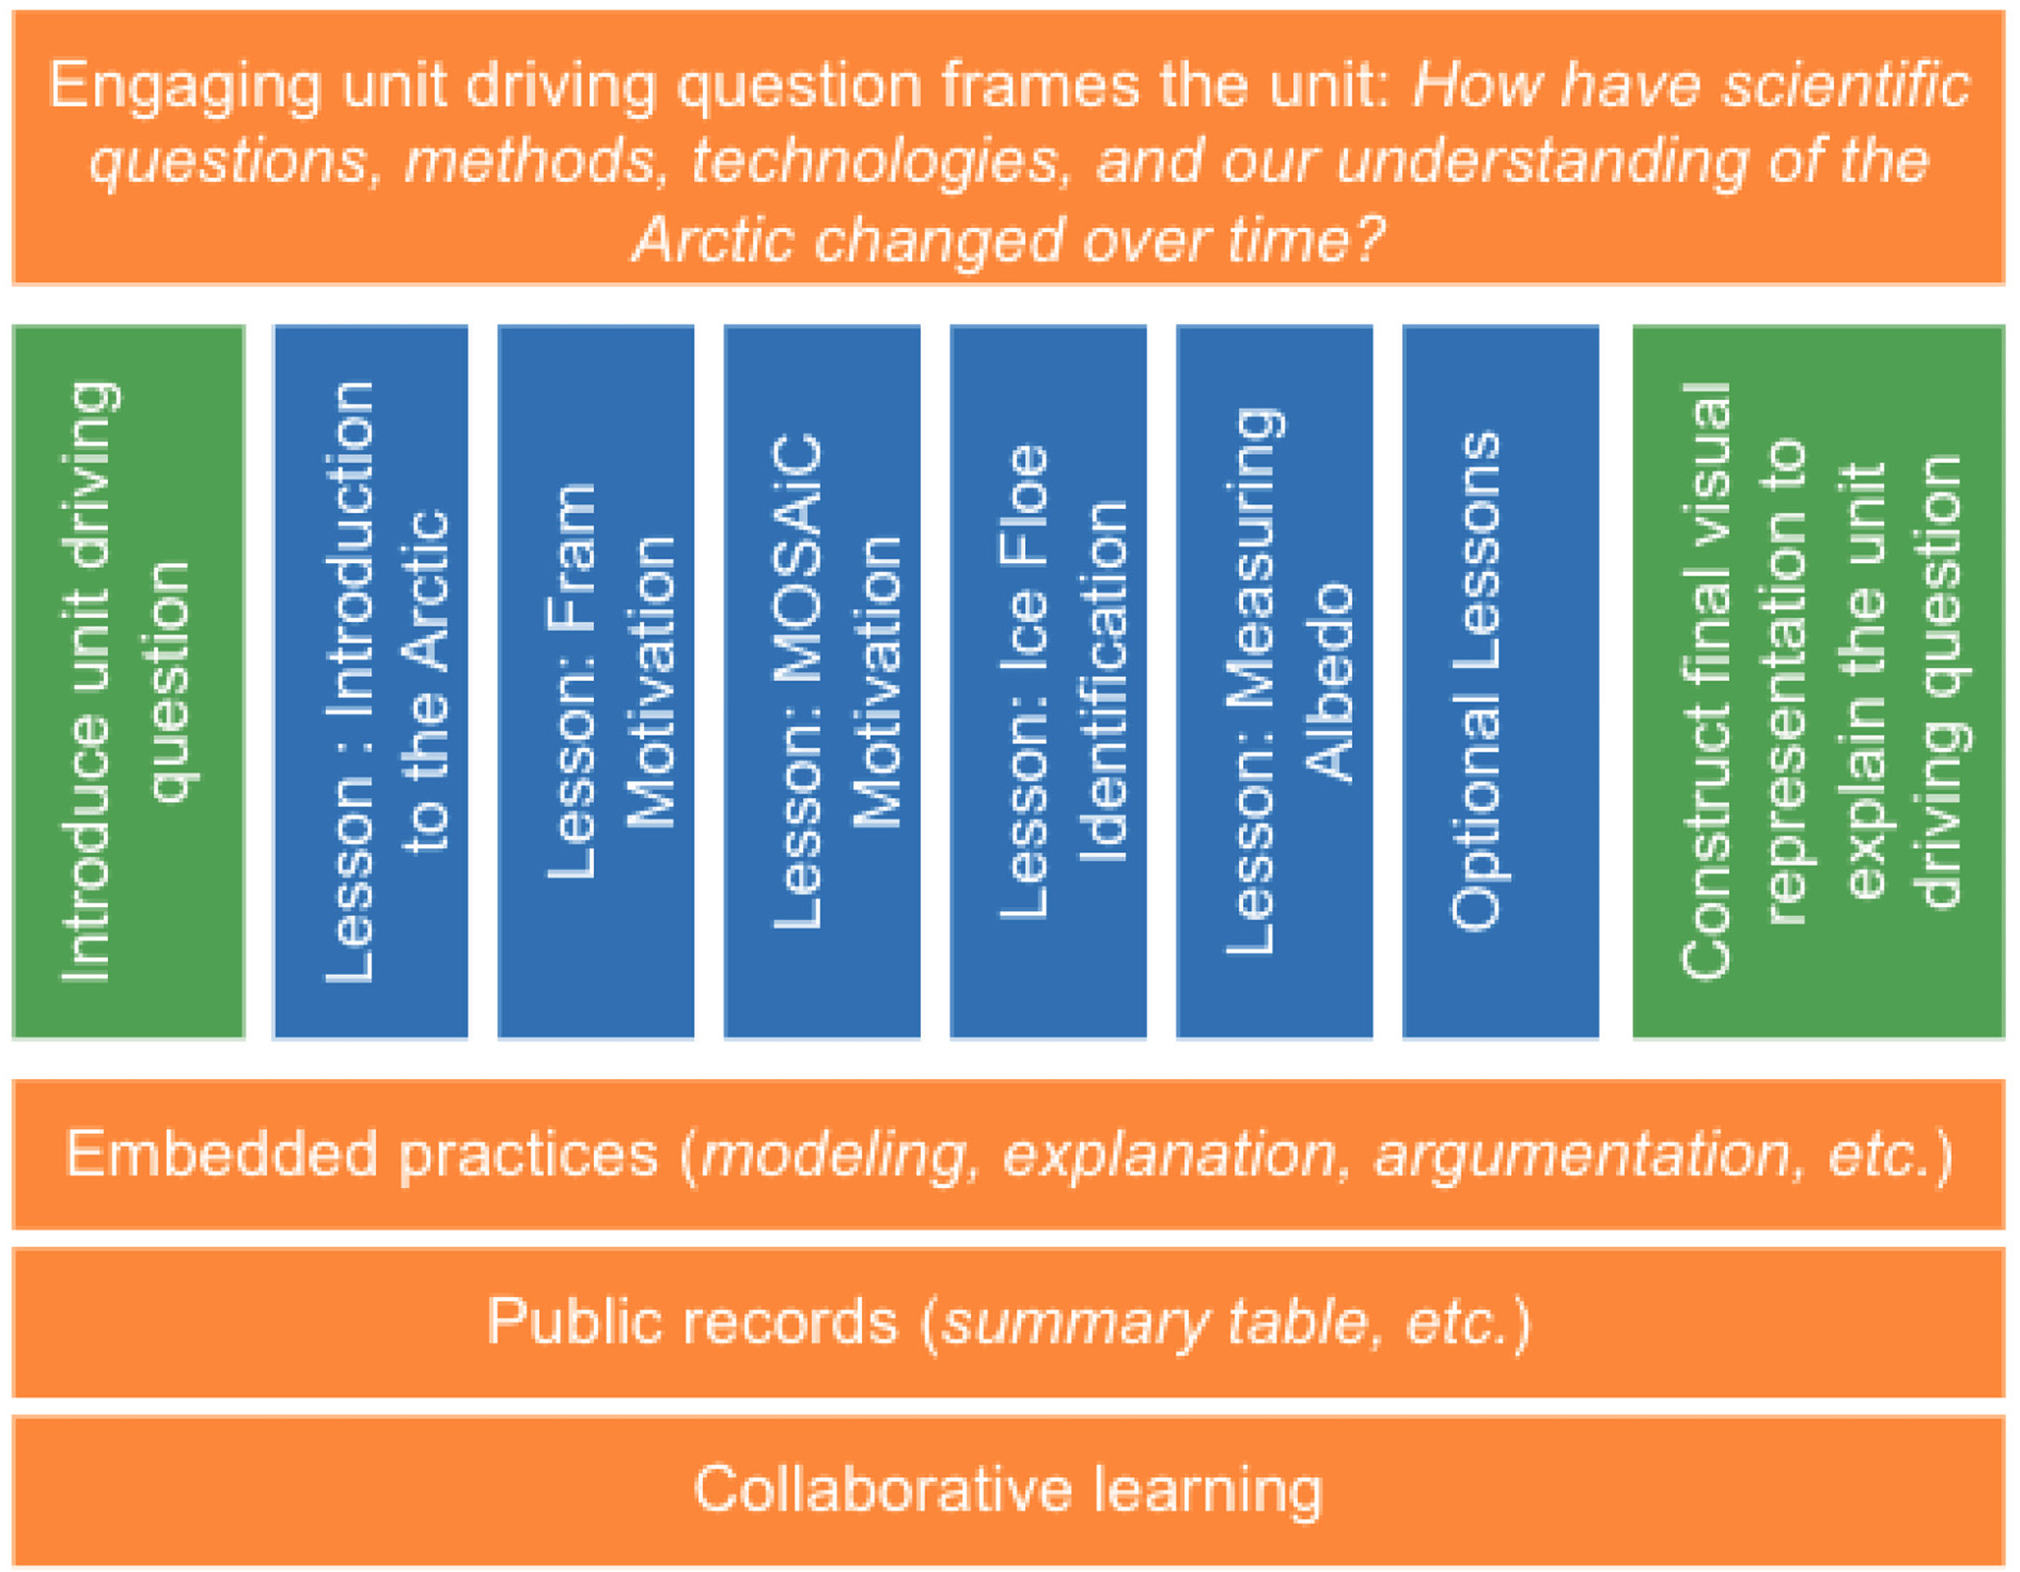 |	FIGURE 2: Basic flow of the unit, incorporating ambitious science teaching practices. Figure modified from Model-Based Inquiry (see Model-Based Inquiry and Ambitious Science Teaching in Resources).